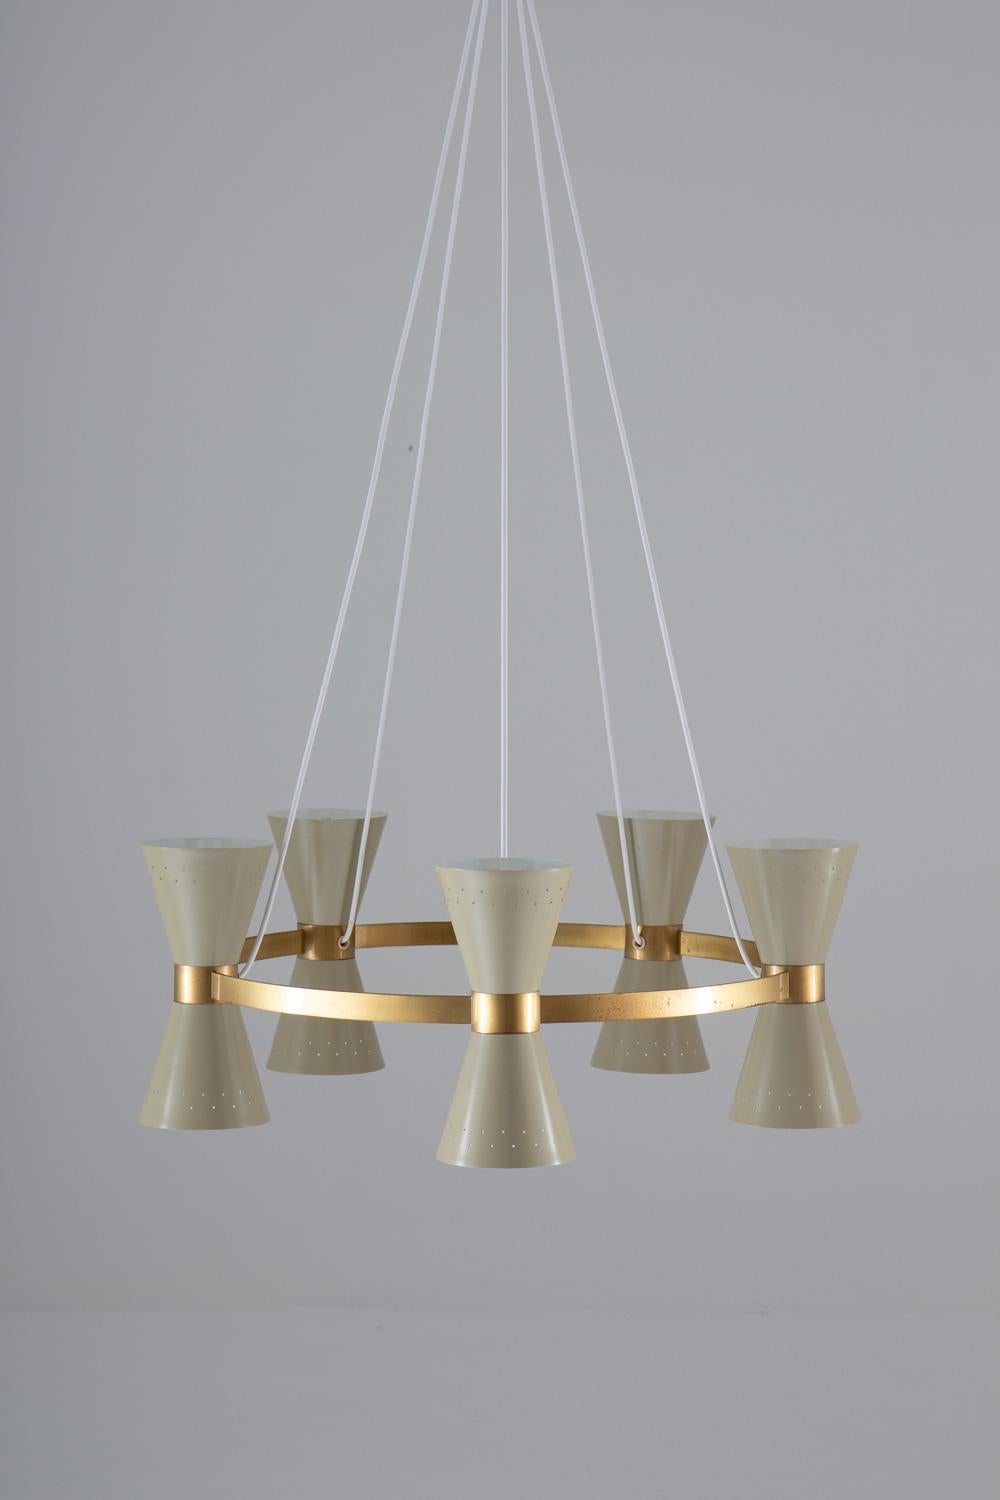 20th Century Swedish Midcentury Chandelier in Brass and Metal by Alf Svensson for Bergboms